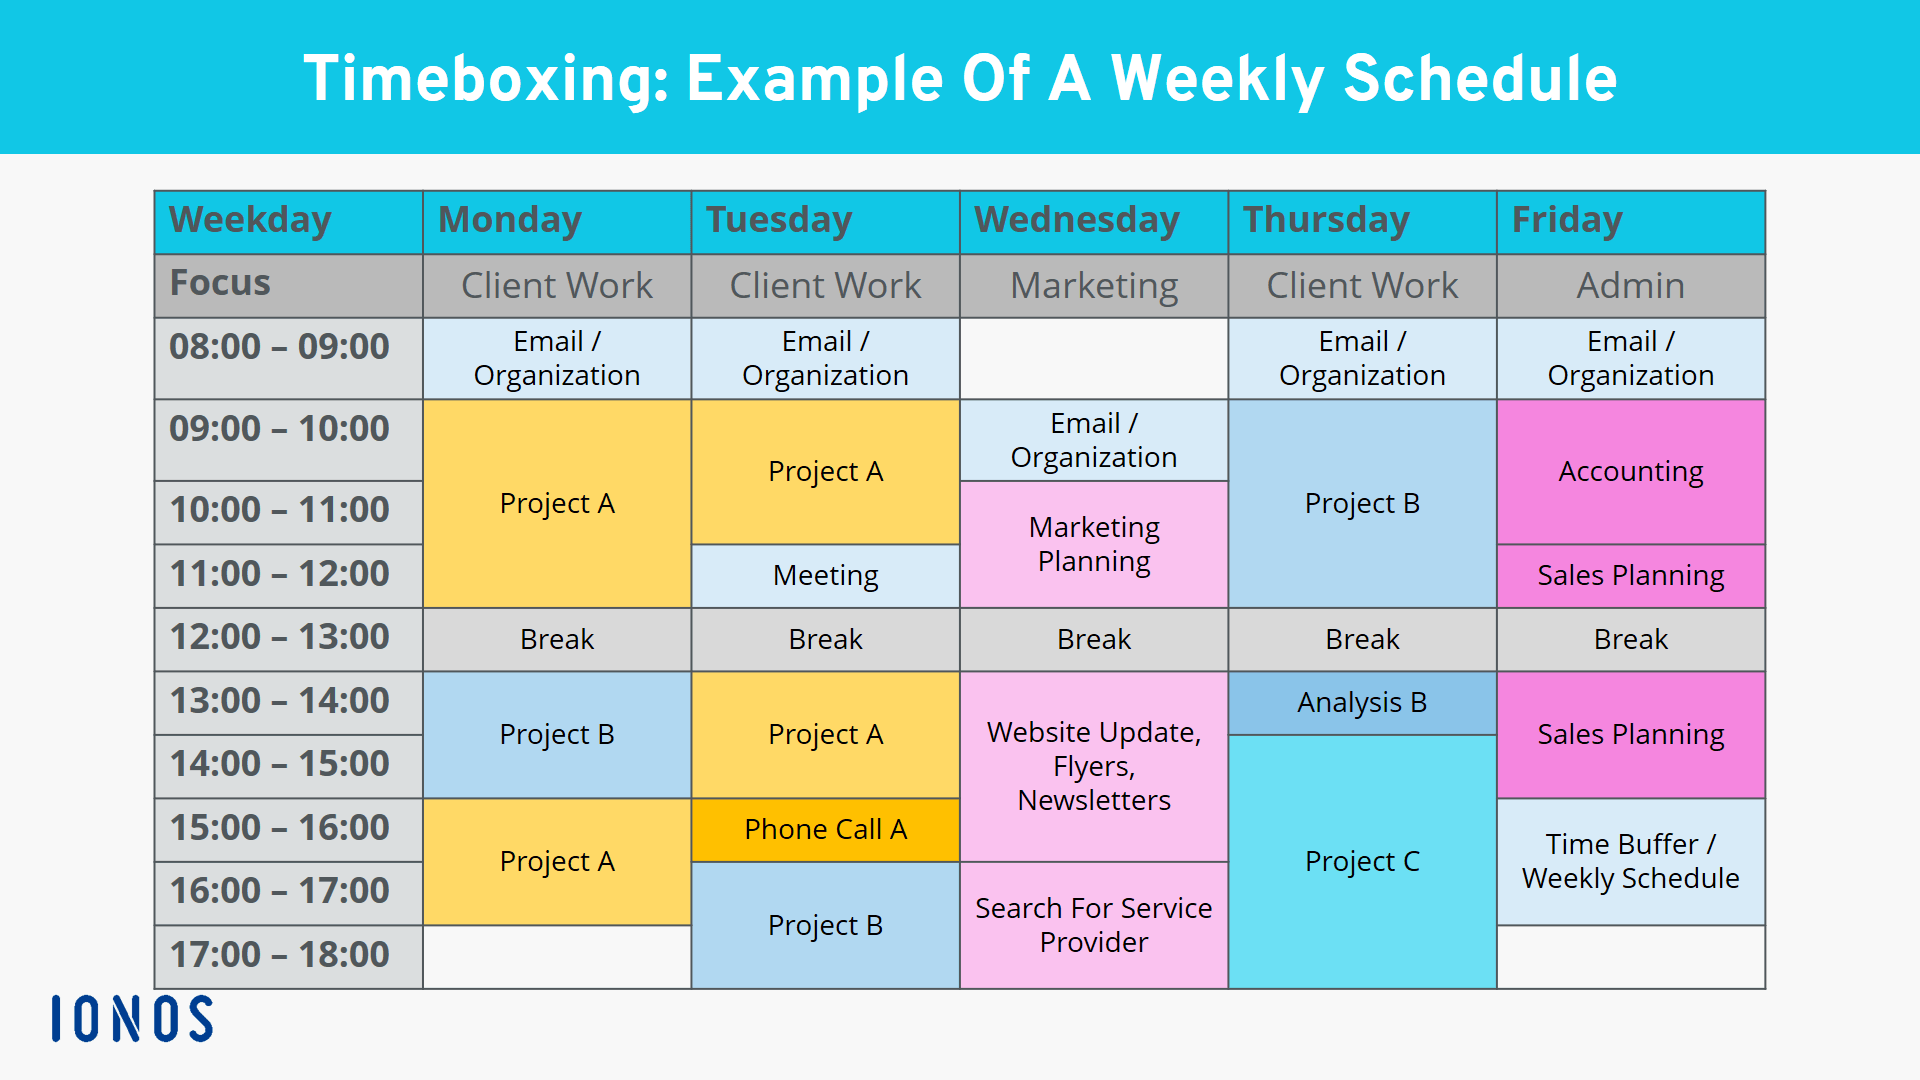 Timeboxing: Example of a weekly schedule with timeboxes